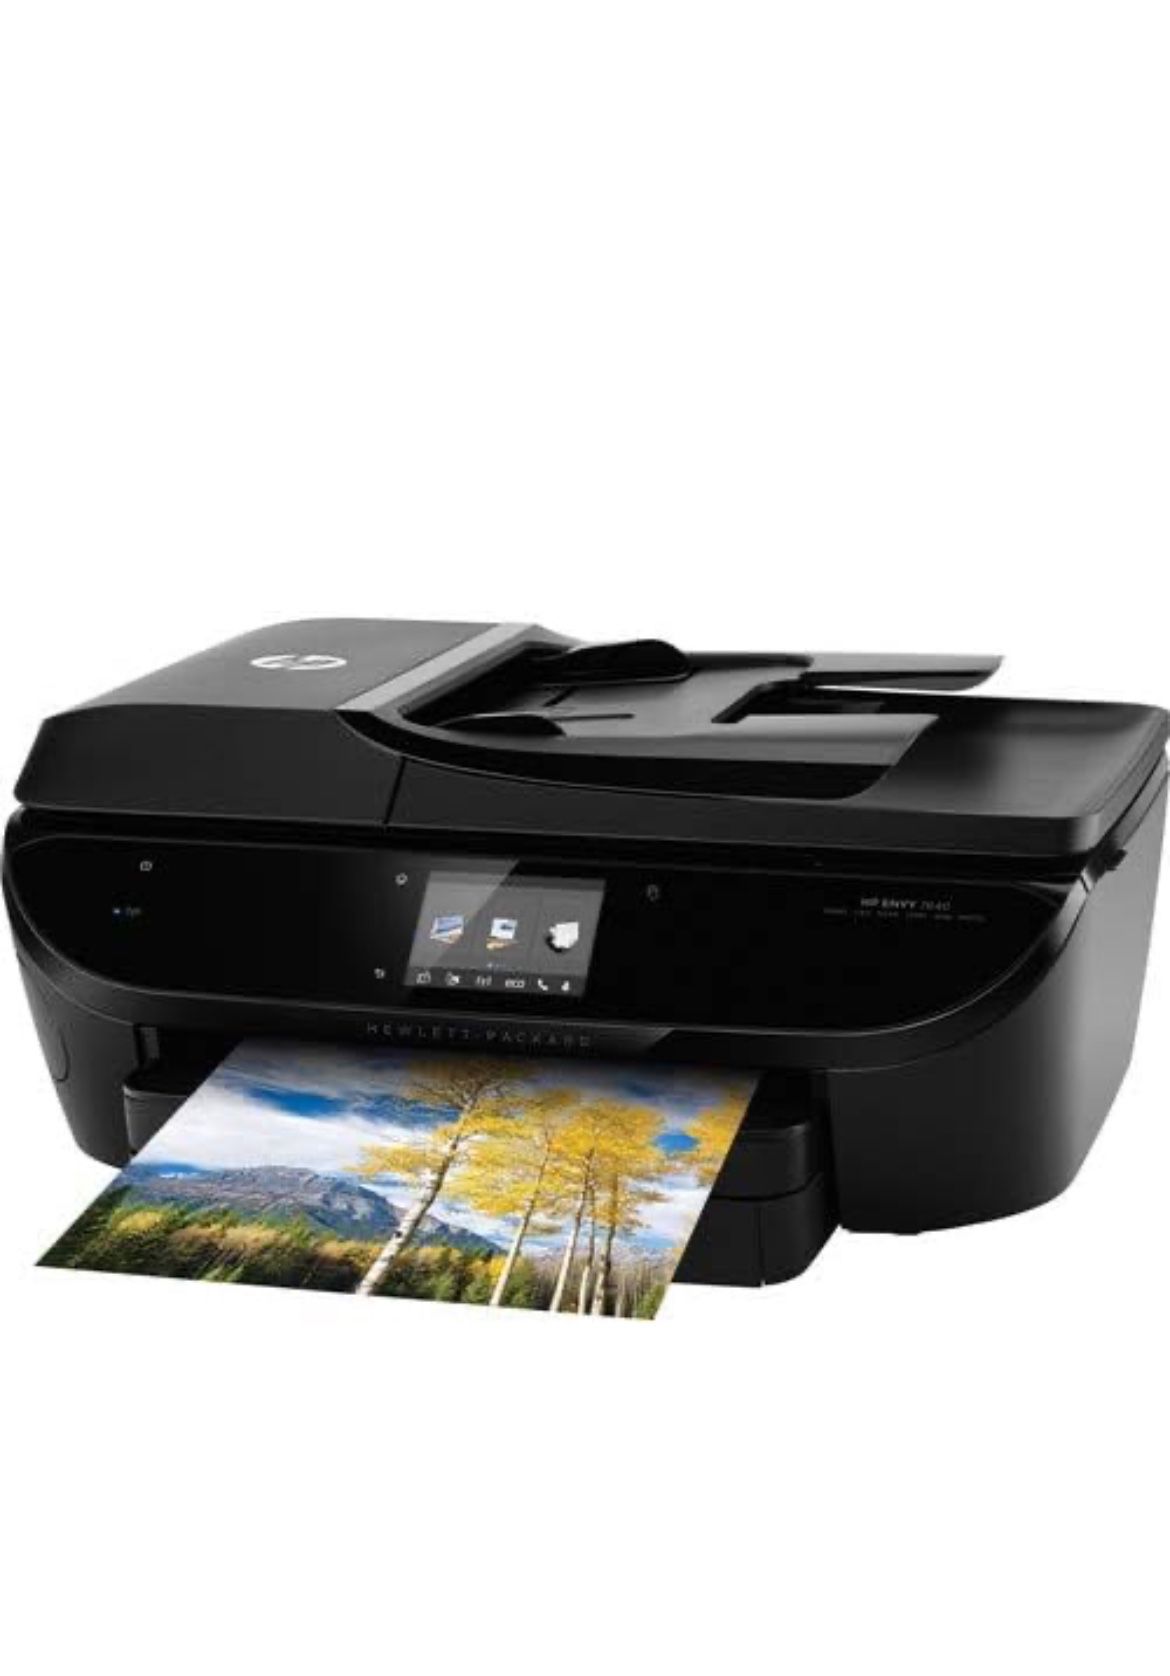 HEE7640 Envy Wireless 7640 e-All-in-One Photo Copier, Scanner, Fax and Printer with Mobile Printing, Duplex, Up to 22 ppm, Up to 4800 x 1200 dpi